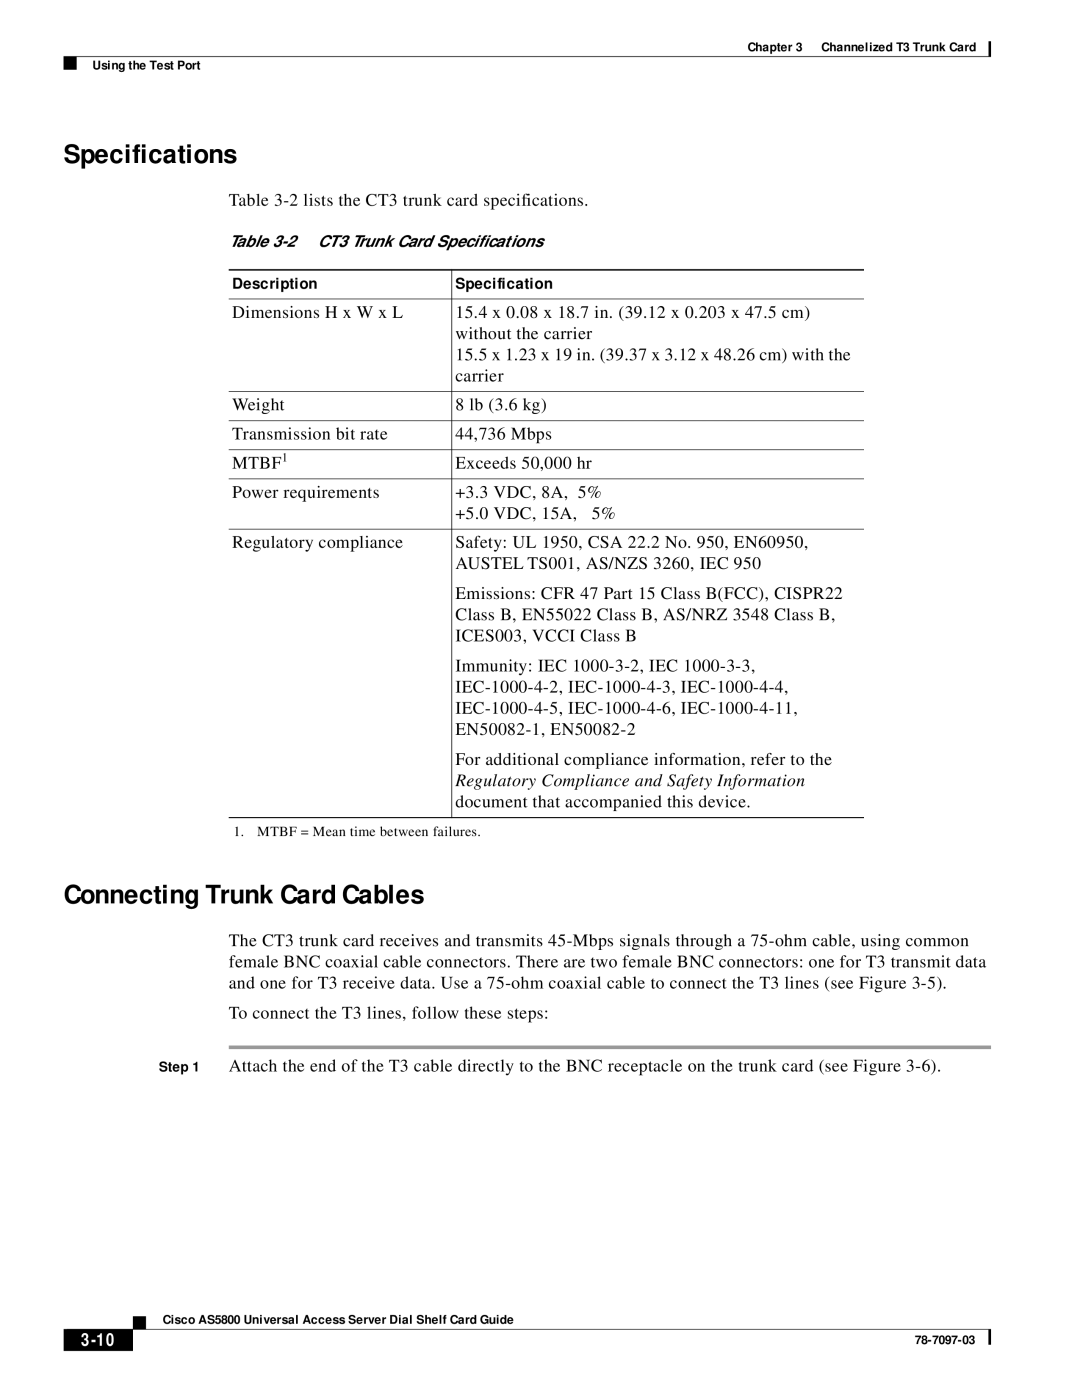 Cisco Systems AS5800 Specifications, Connecting Trunk Card Cables, Regulatory Compliance and Safety Information, 3-10 